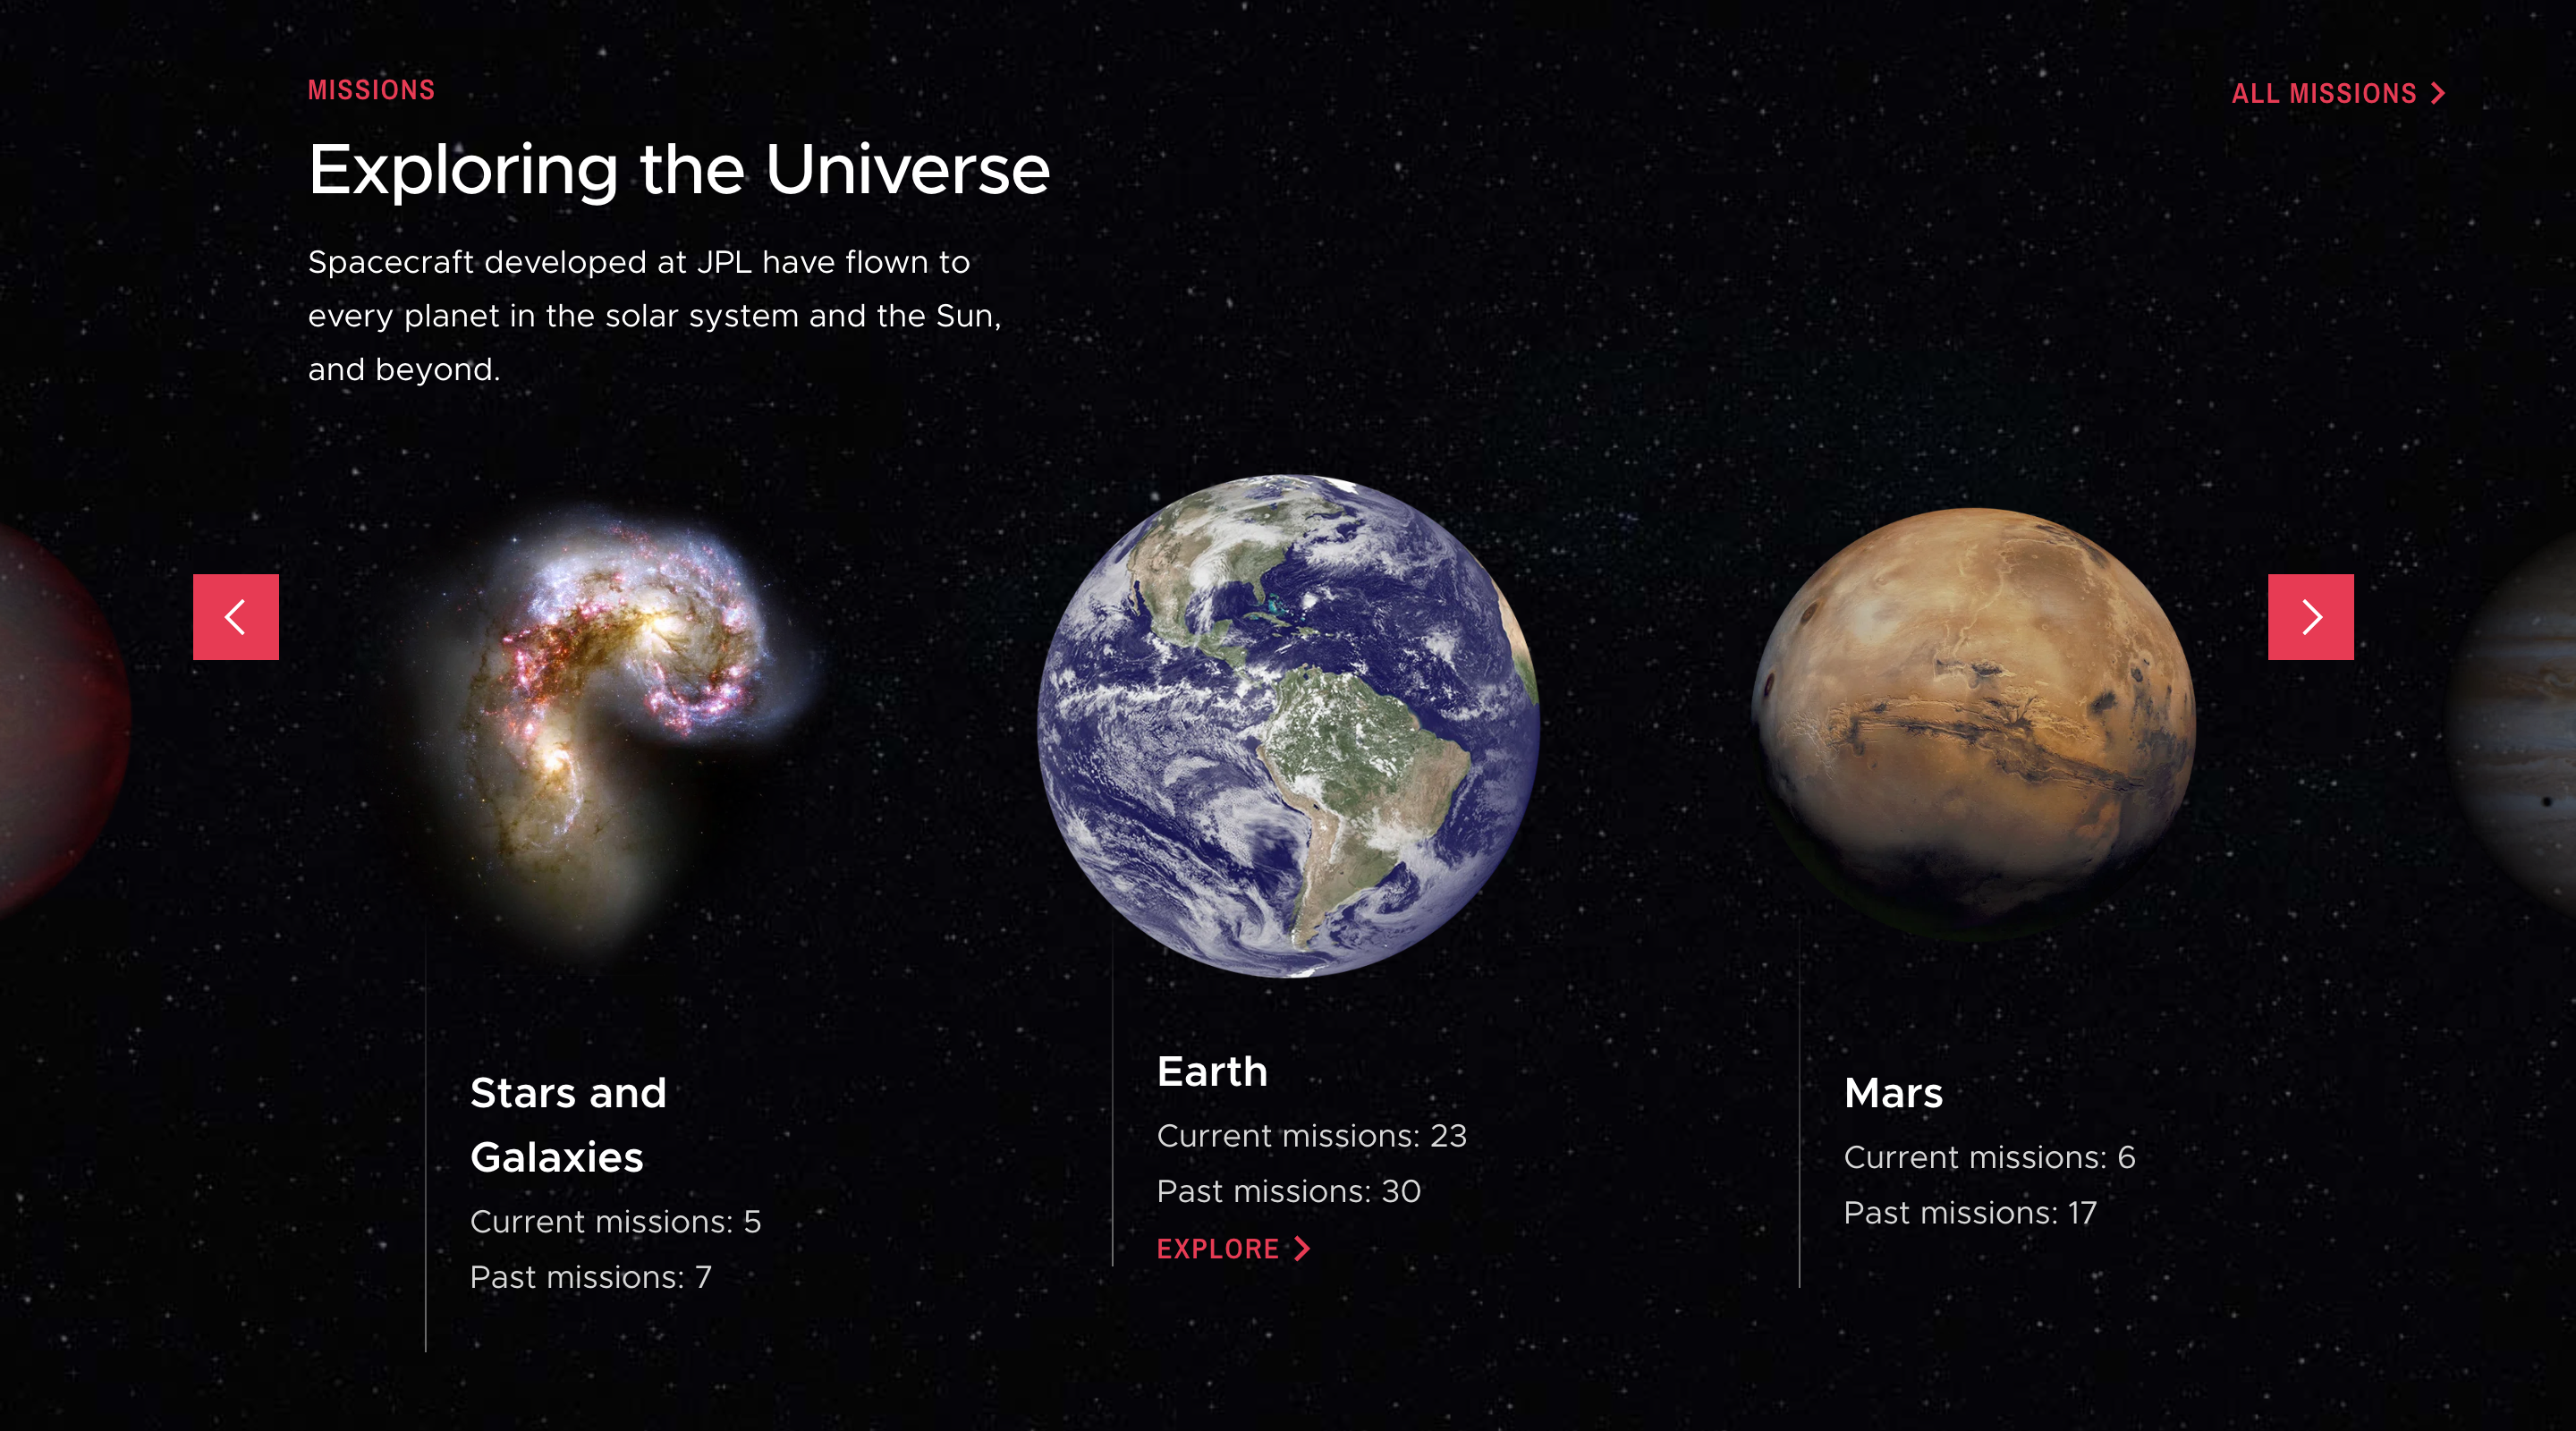 Screenshot of the 'Exploring the Universe' section on the NASA Jet Propulsion Laboratory website. The section shows statistics for three different mission locations: 'Starts and Galaxies', 'Earth', and 'Mars'.